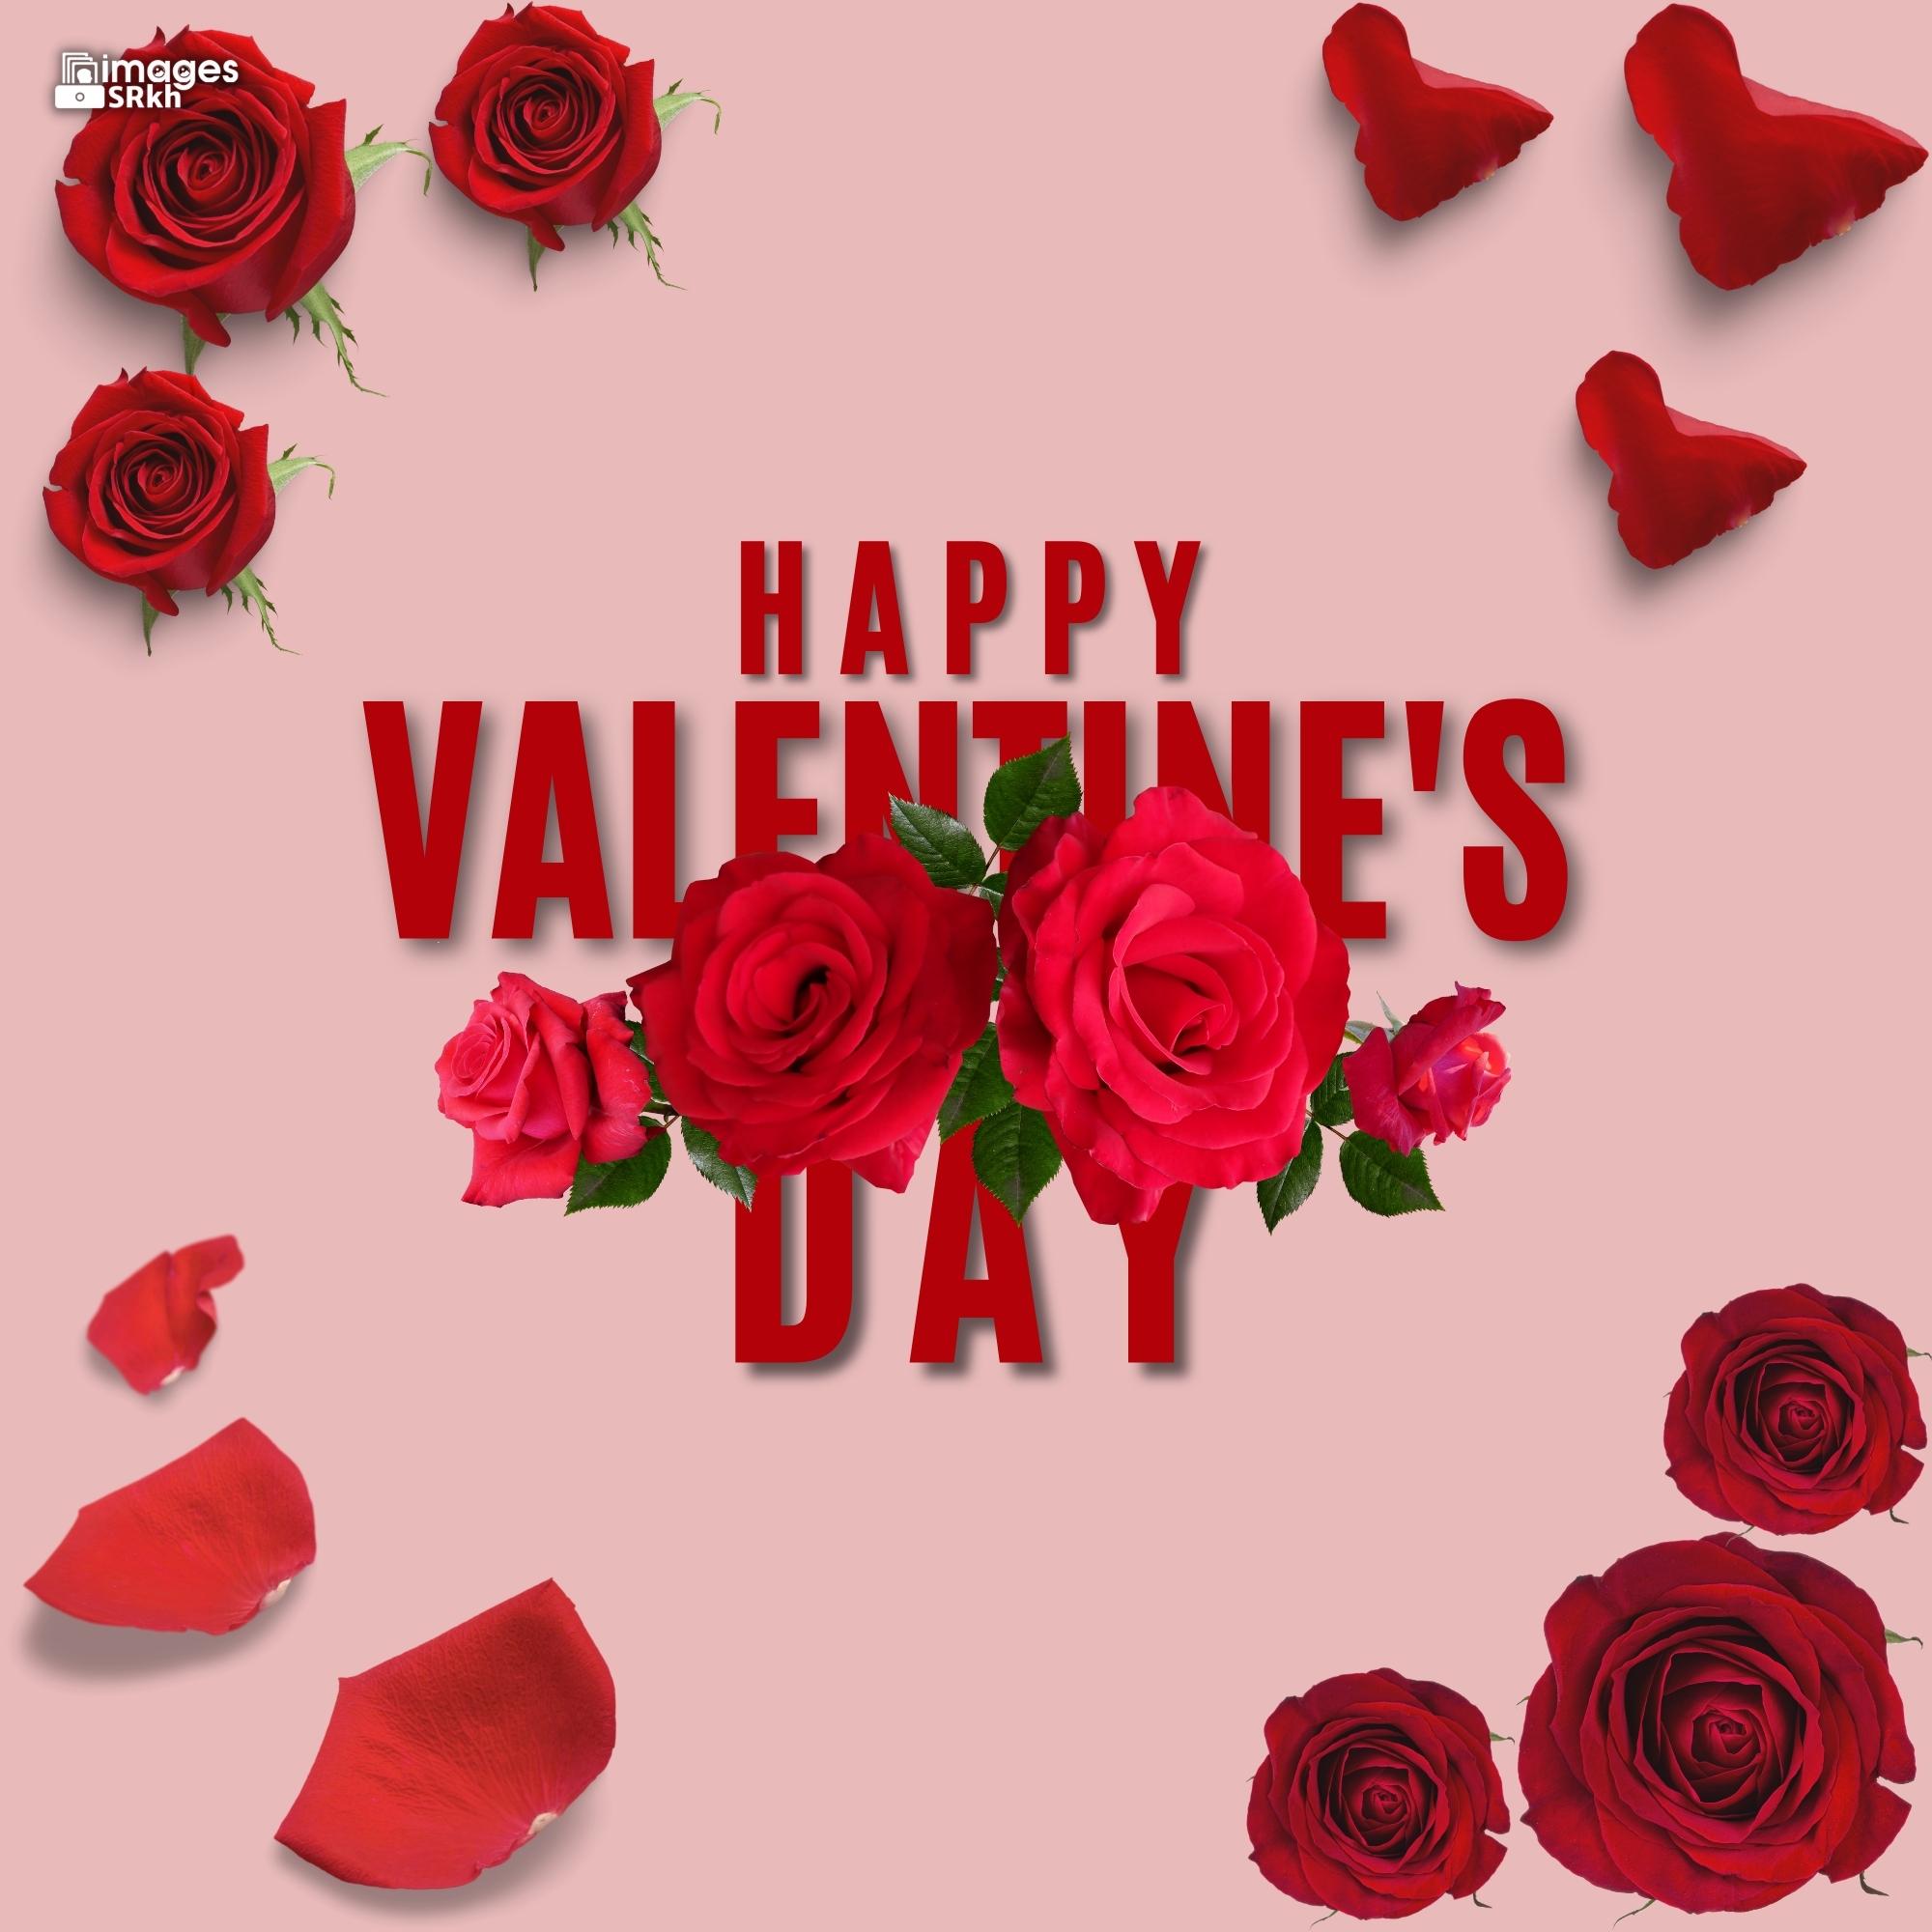 Happy Valentines Day | 477 | PREMIUM IMAGES | Wishes for Love